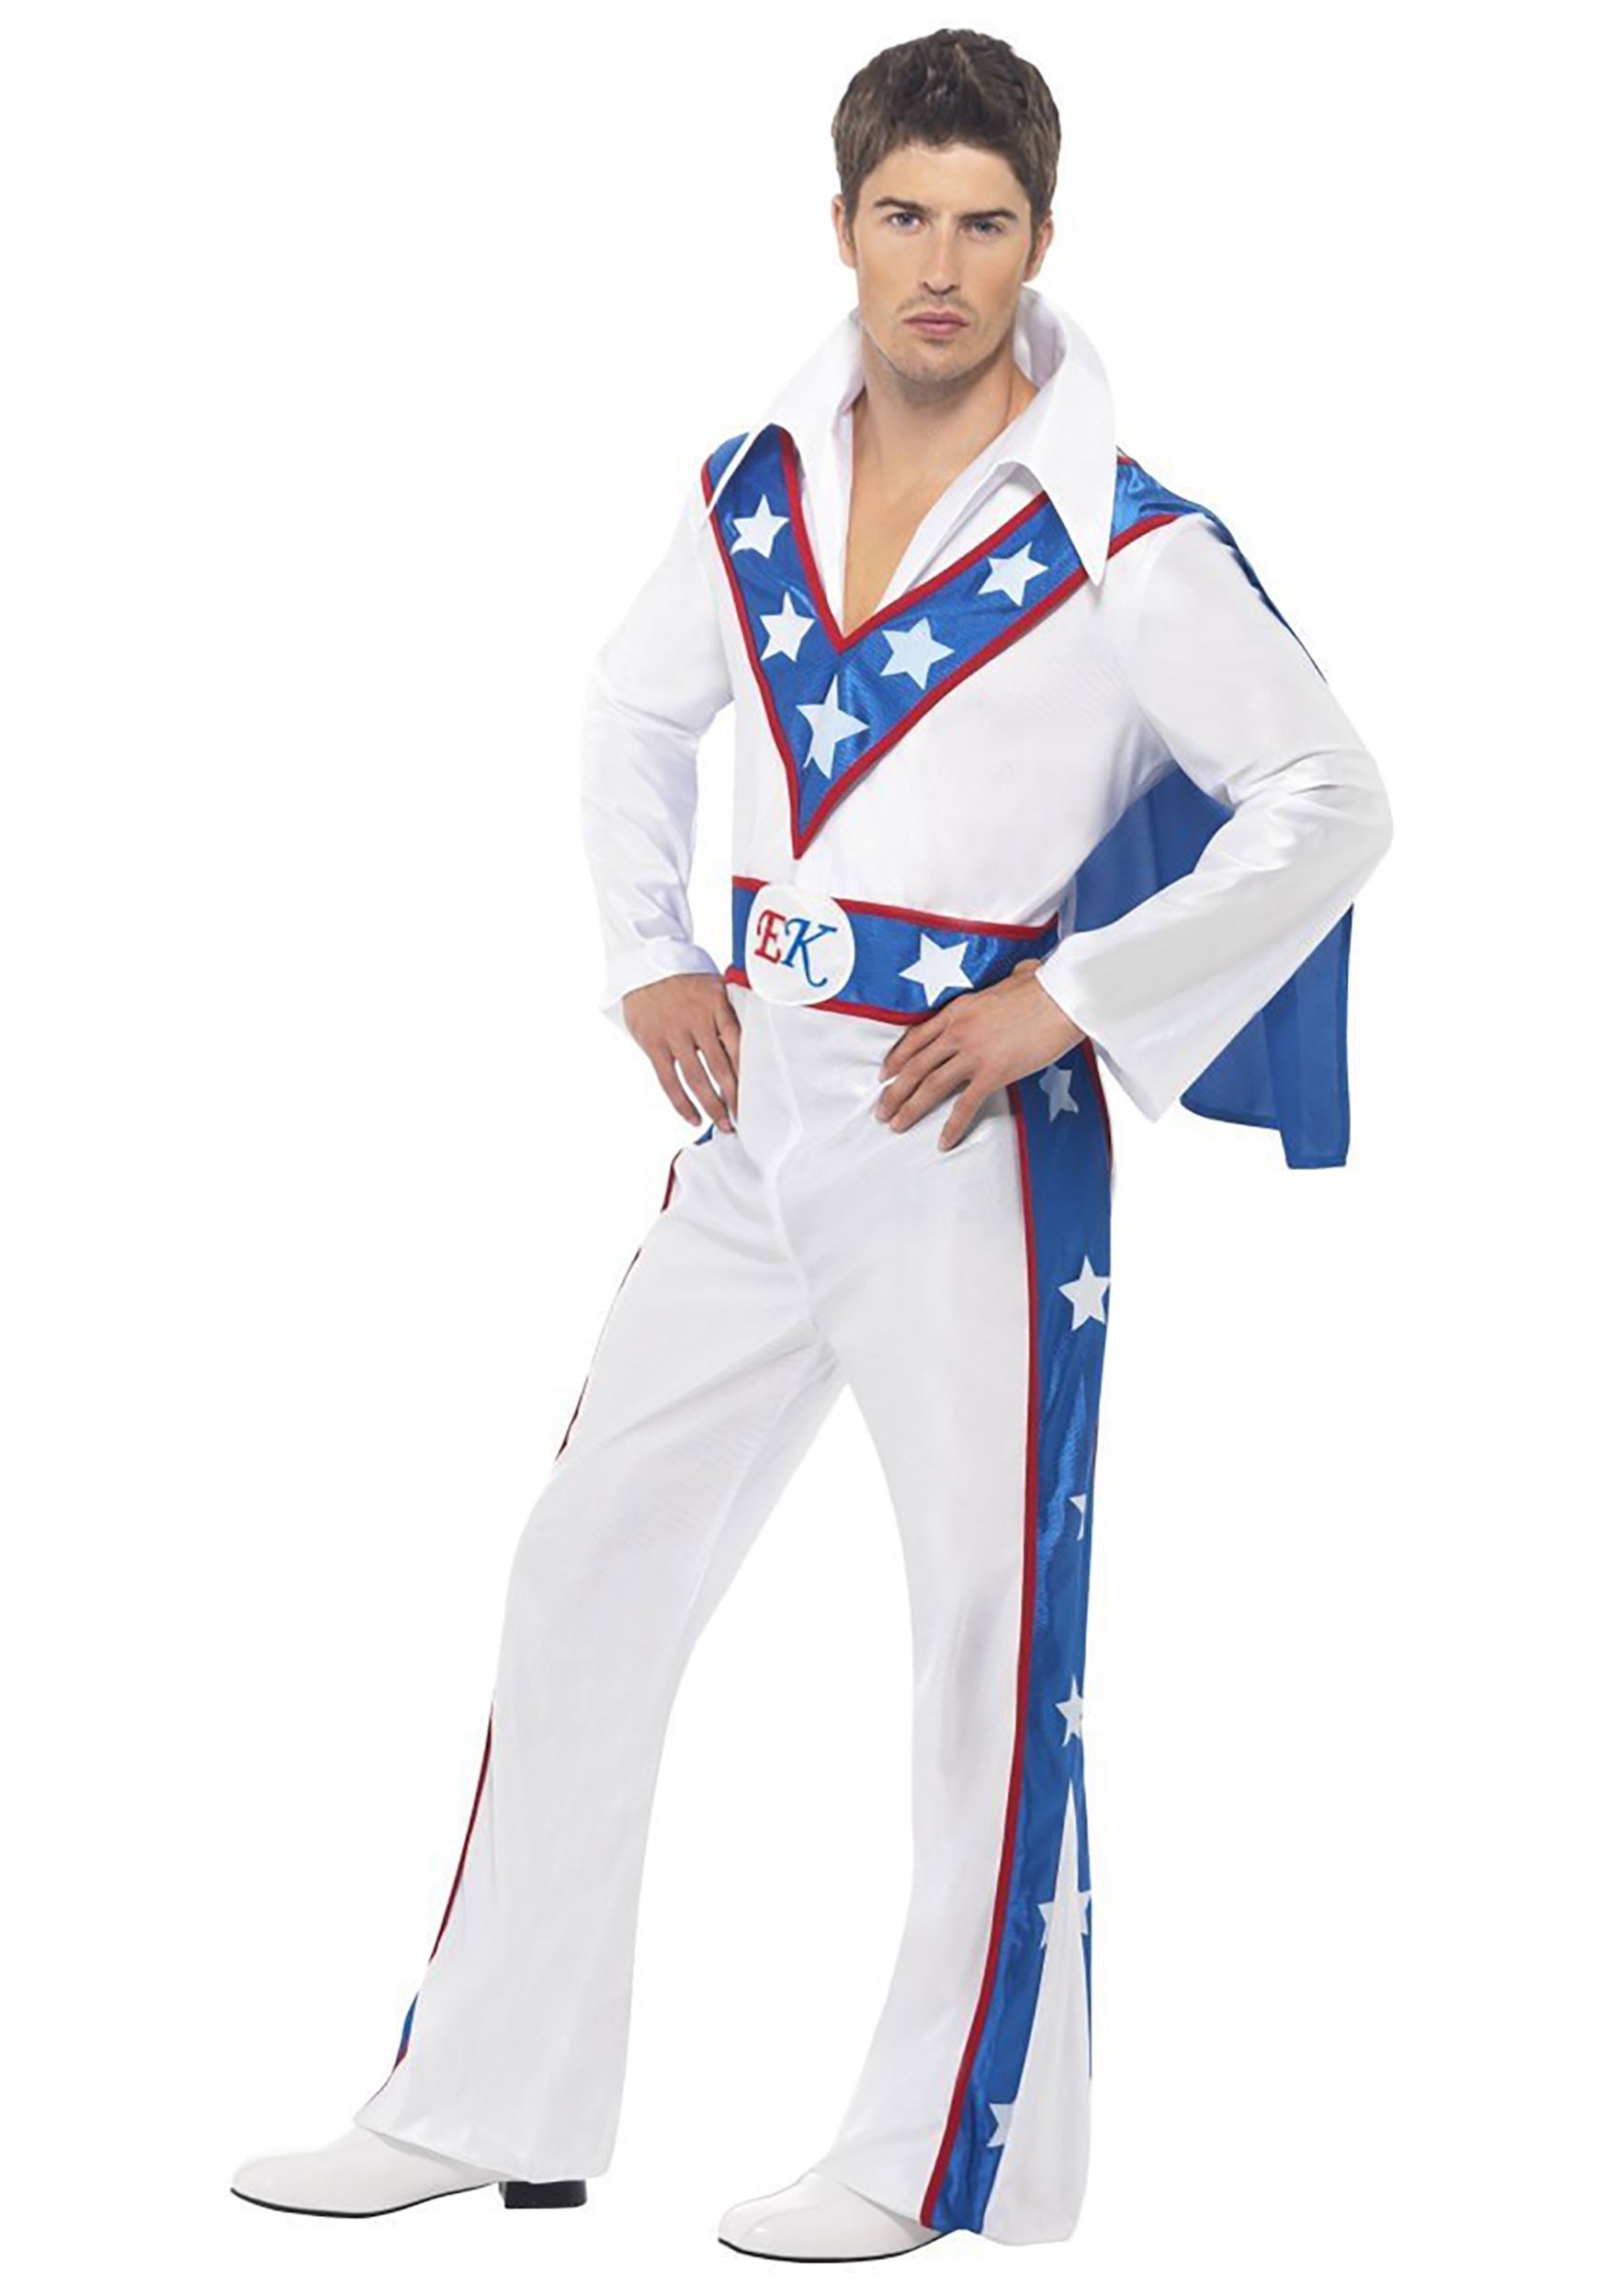 Photos - Fancy Dress EVEL Smiffys  Knievel Costume For Adults Blue/Red/White SM21126L 